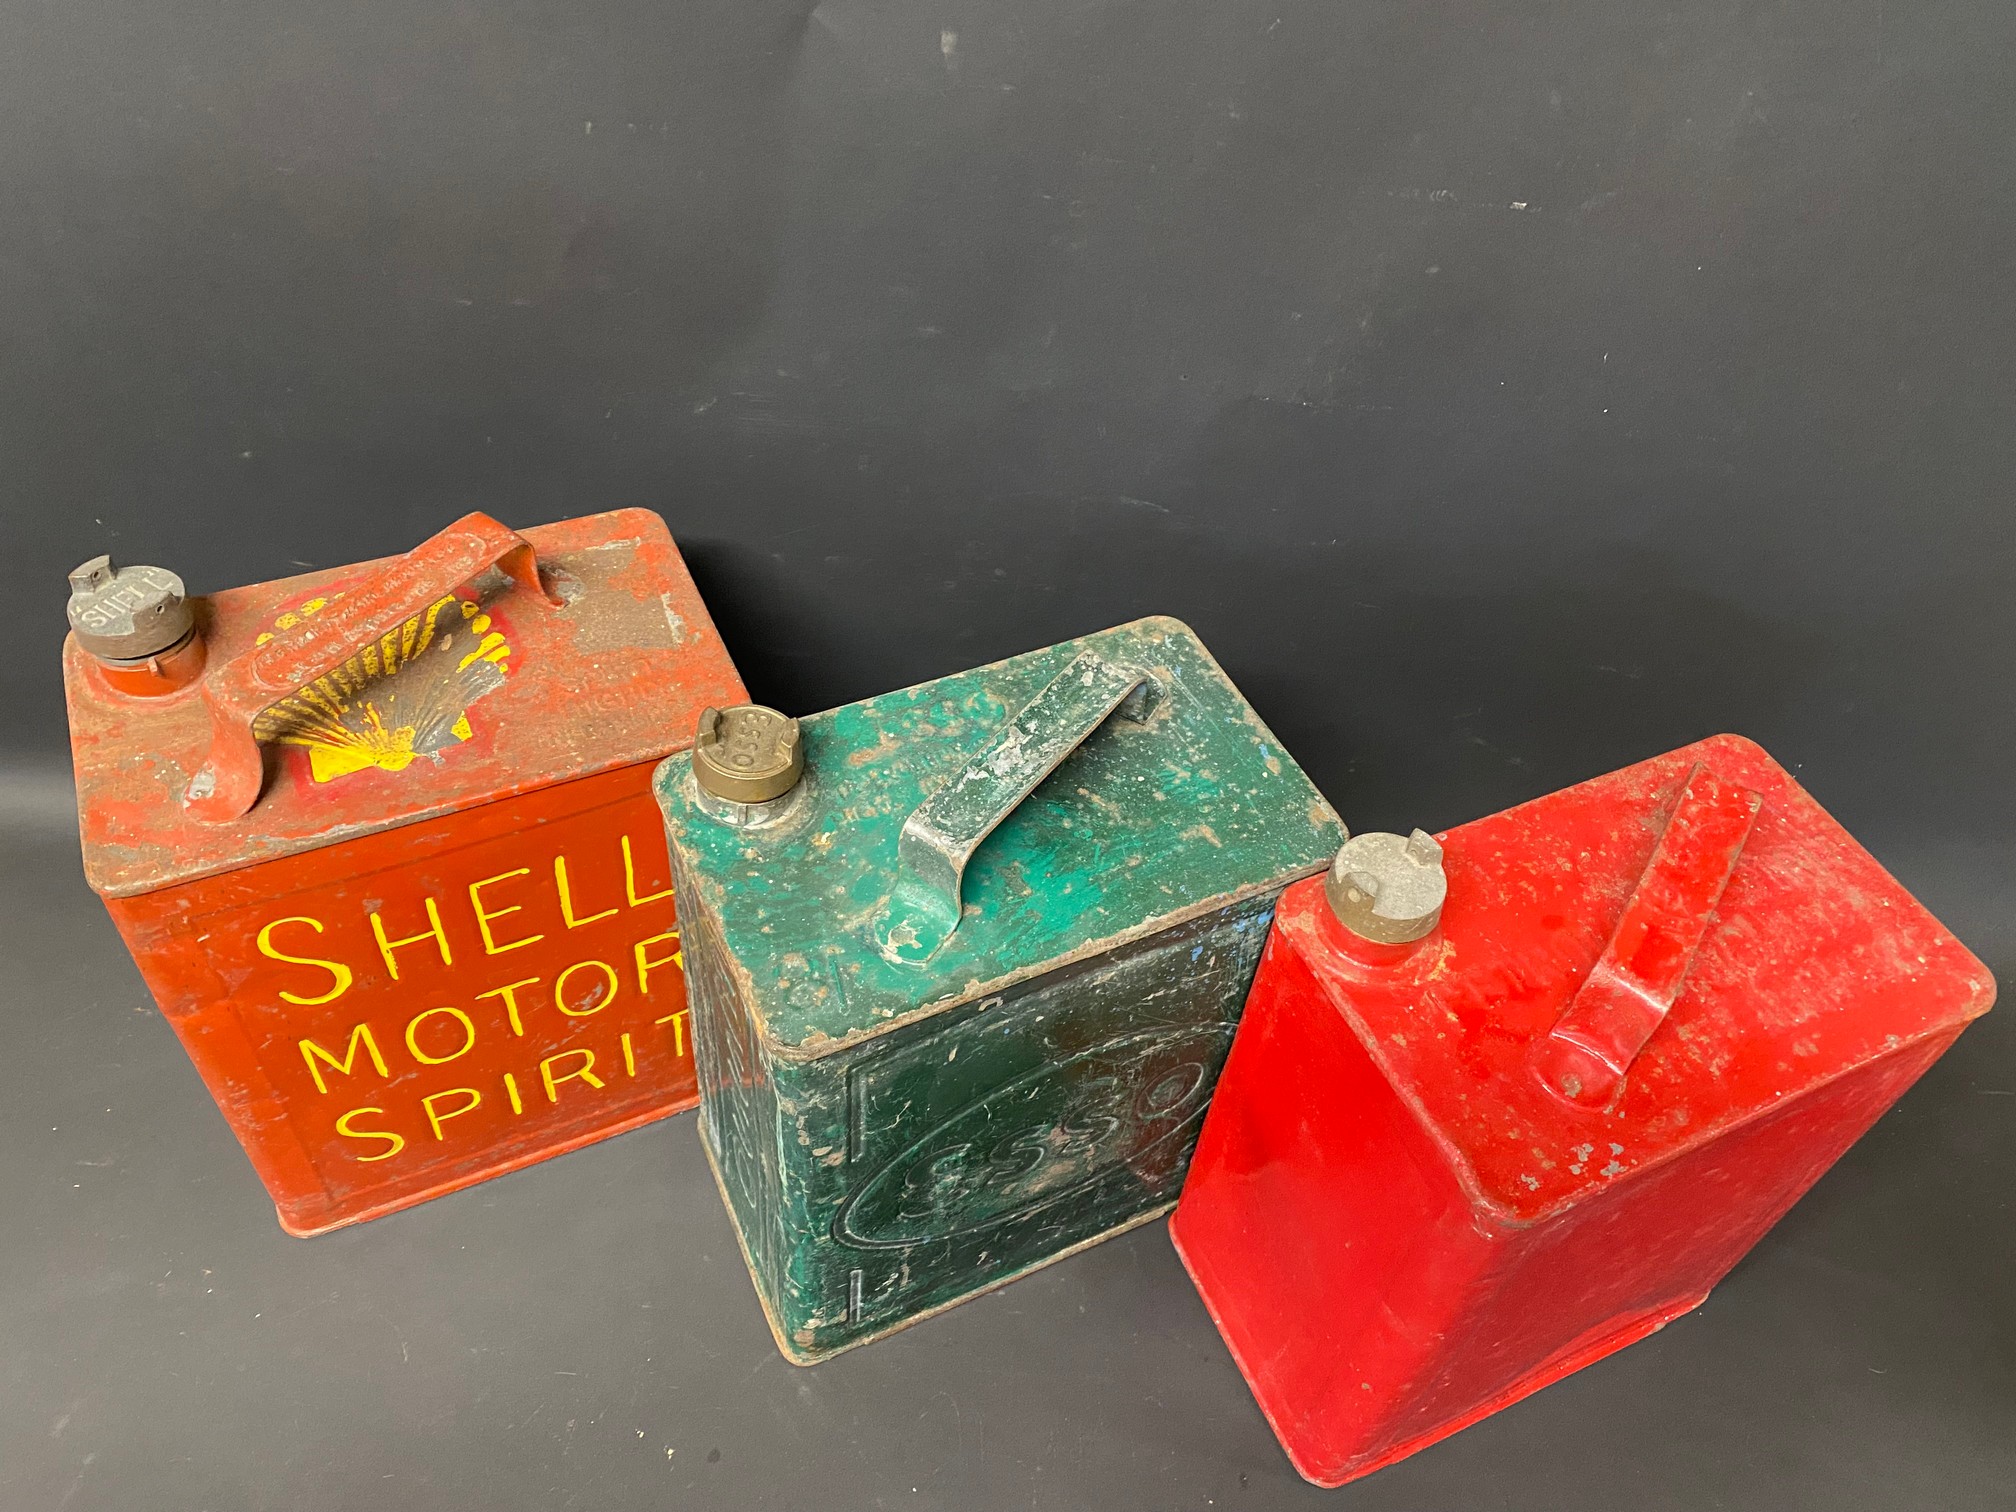 Three two gallon petrol cans for Shell Motor Spirit, Esso and one other. - Image 2 of 2